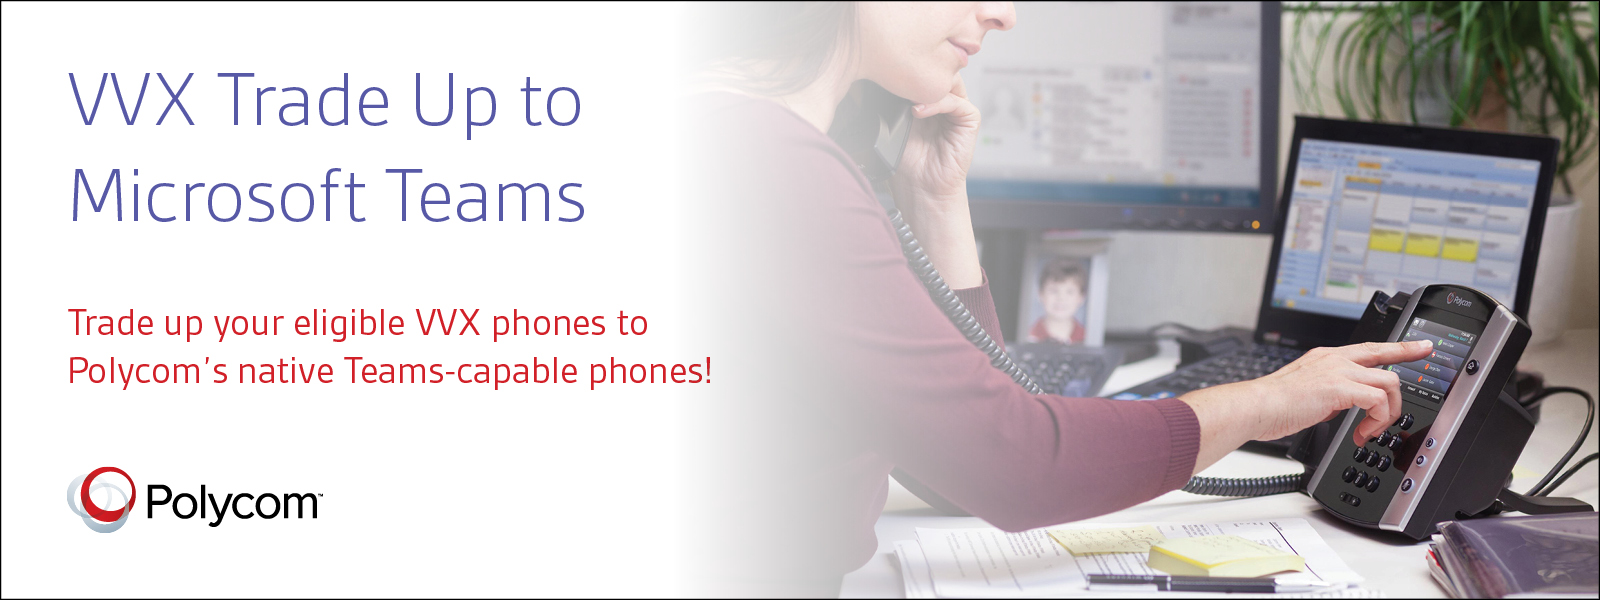 trade-up-to-microsoft-teams-with-polycom-the-new-native-microsoft